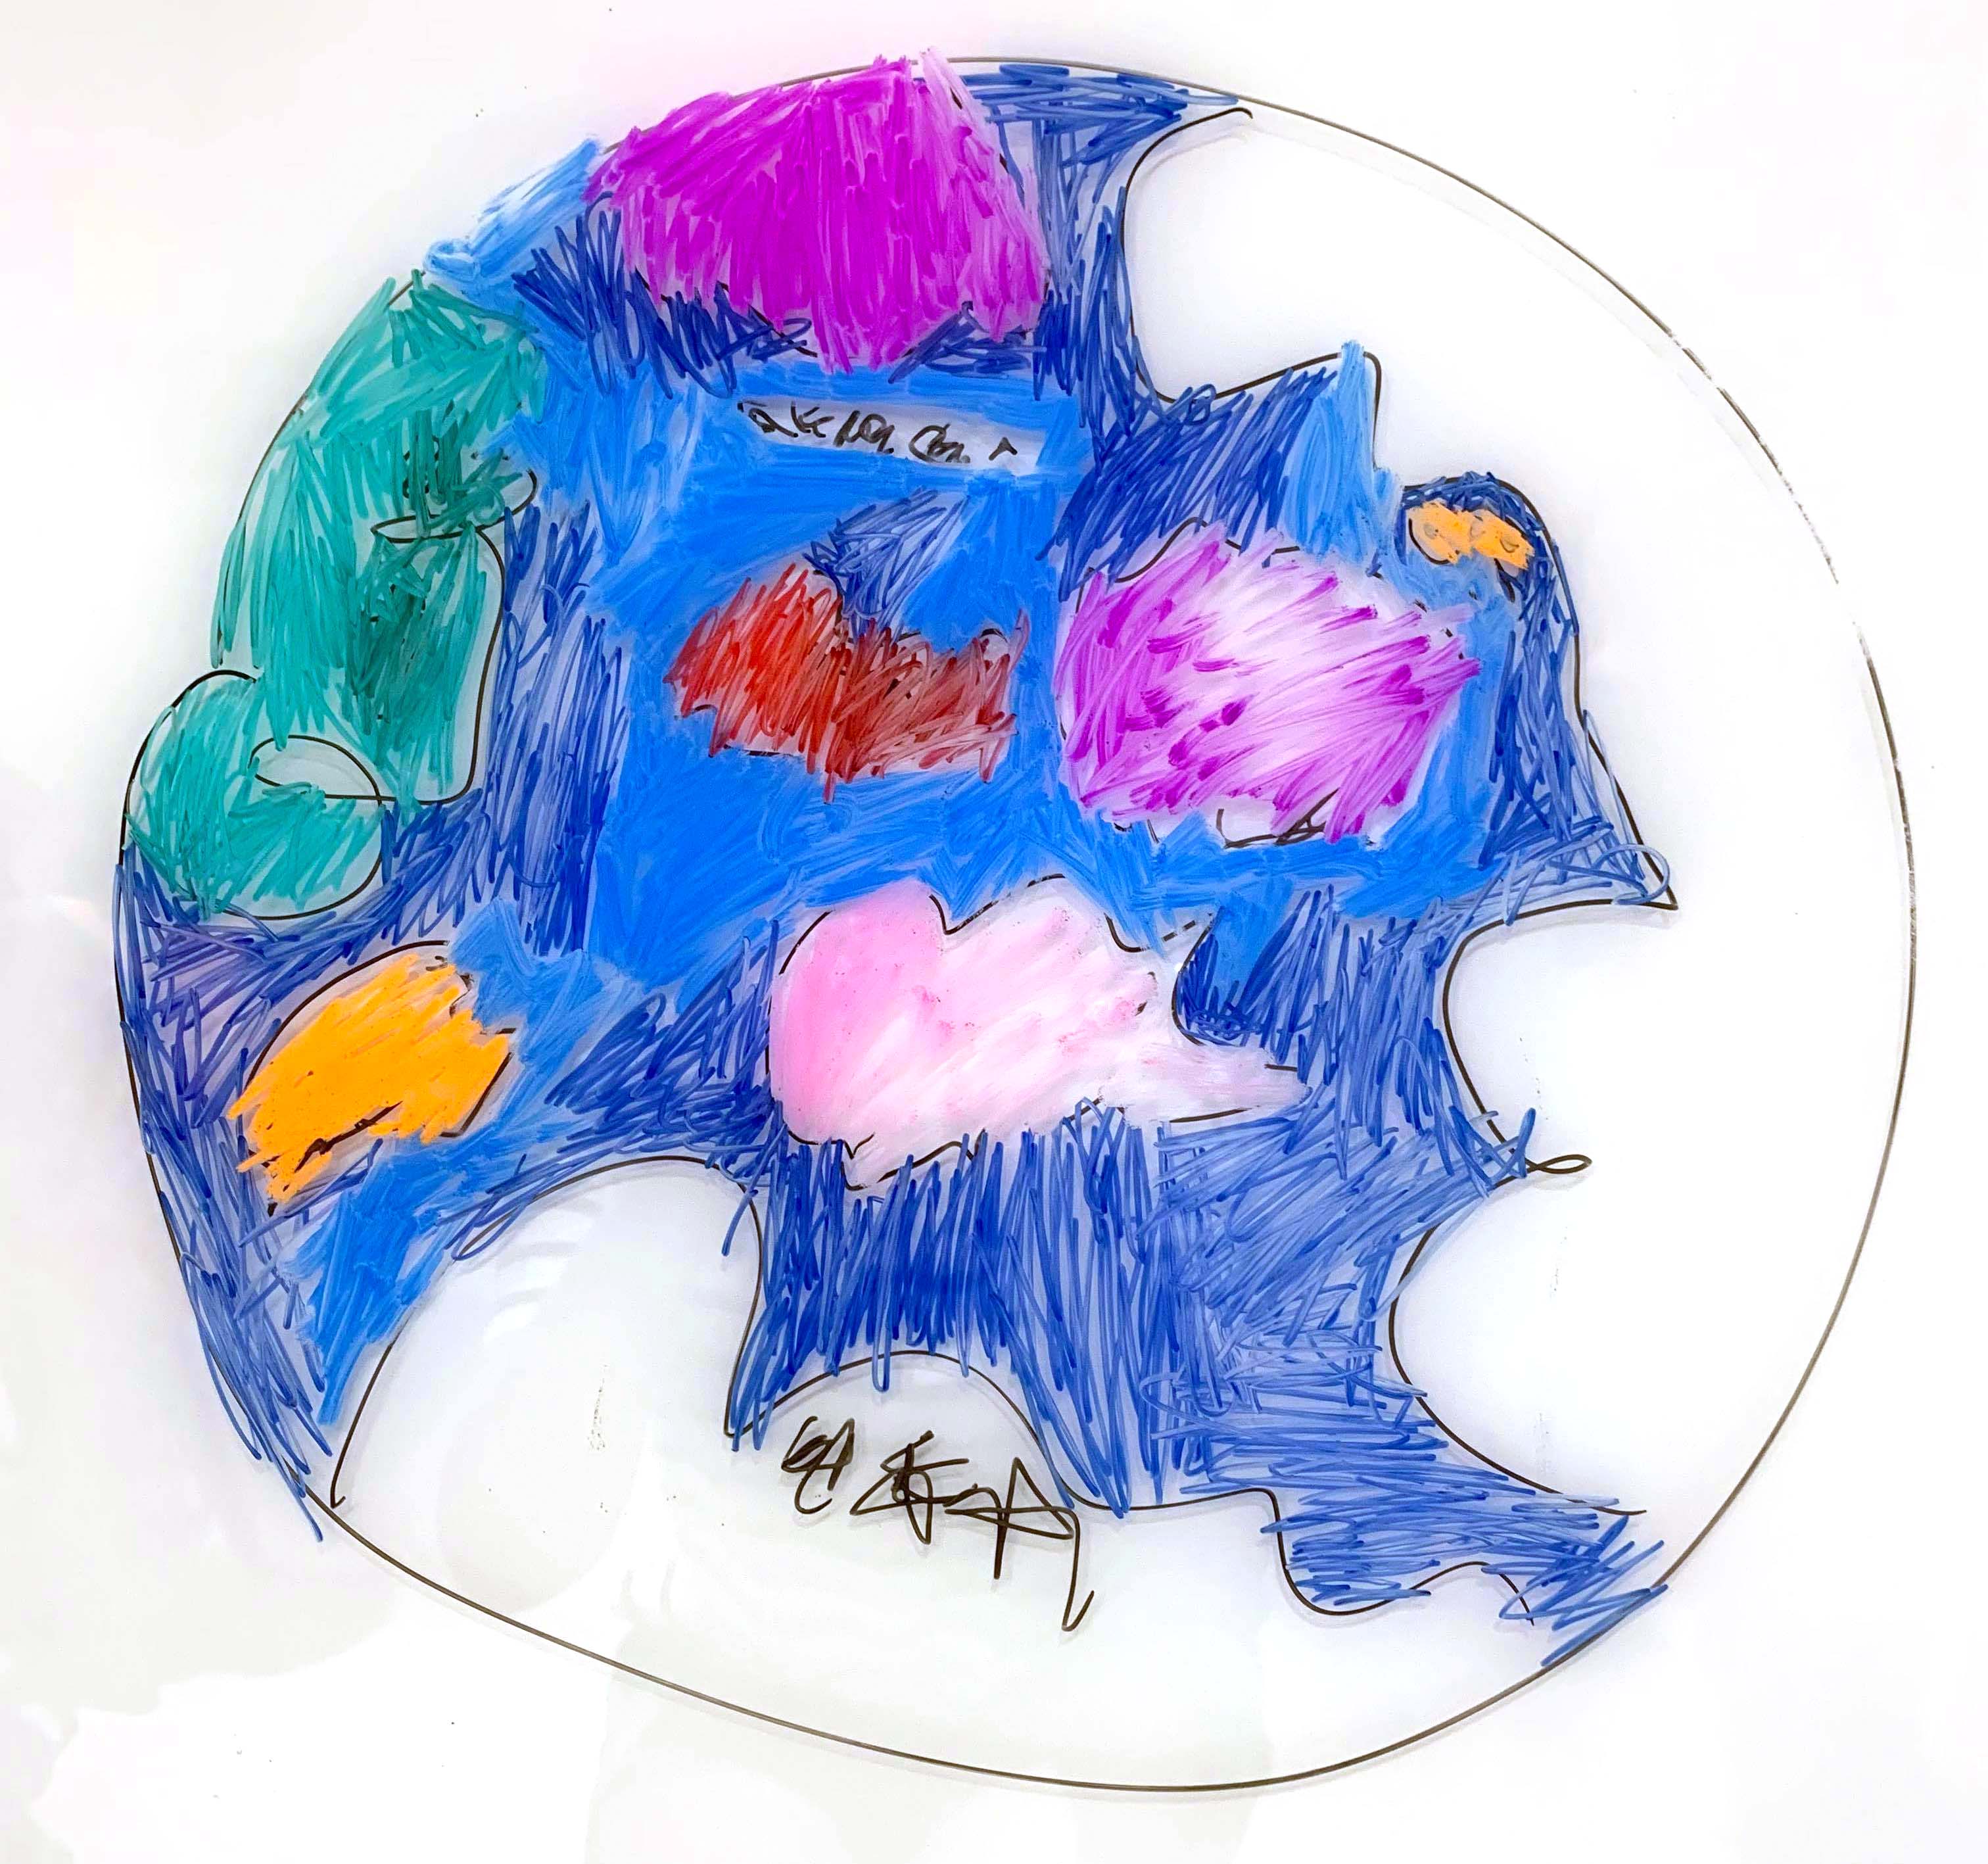 Rei's drawing of the earth